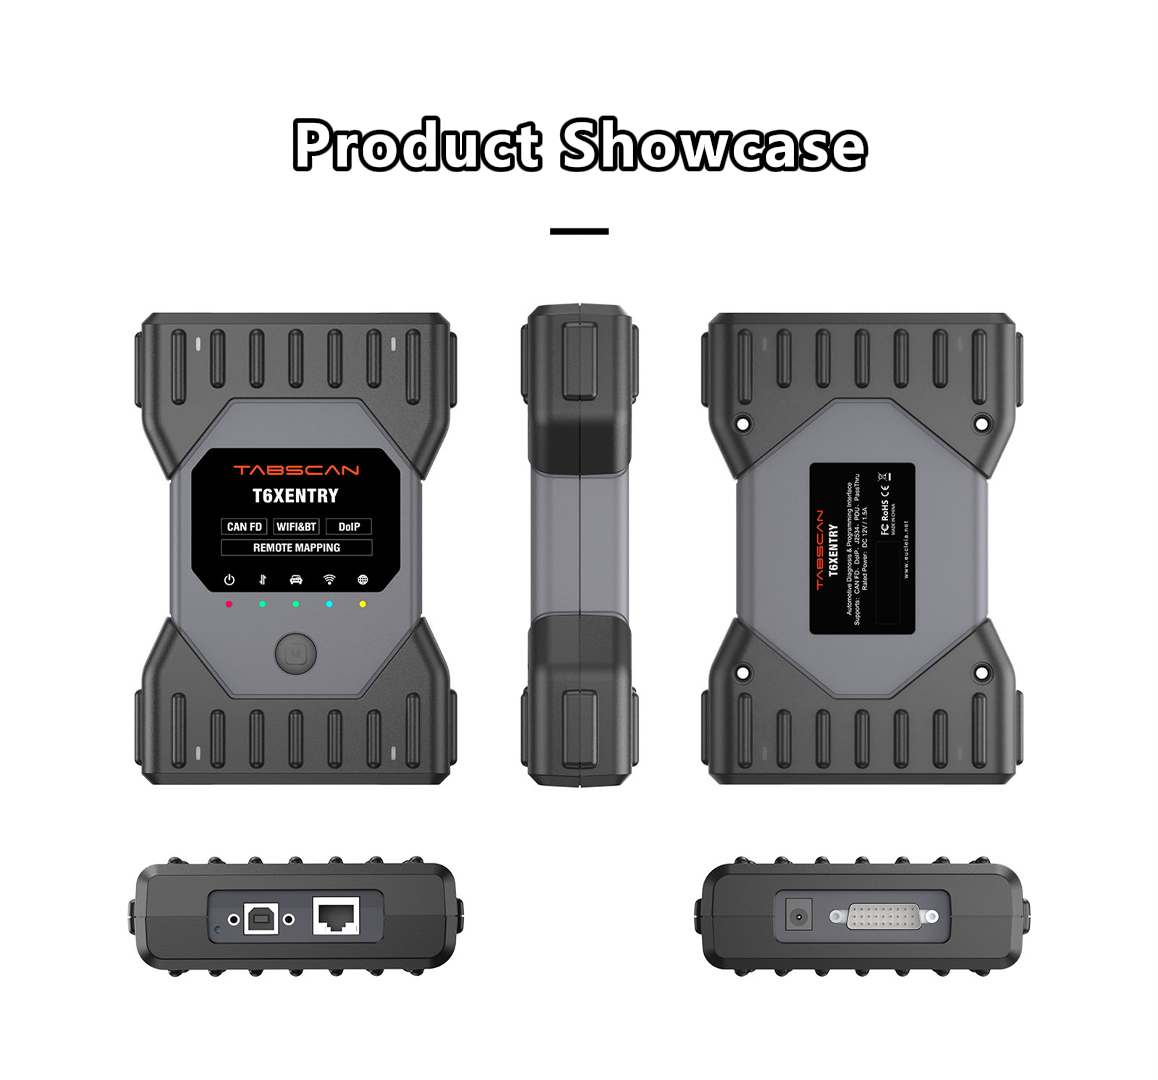 TabScan T6XENTRY C6 Diagnostic Tool